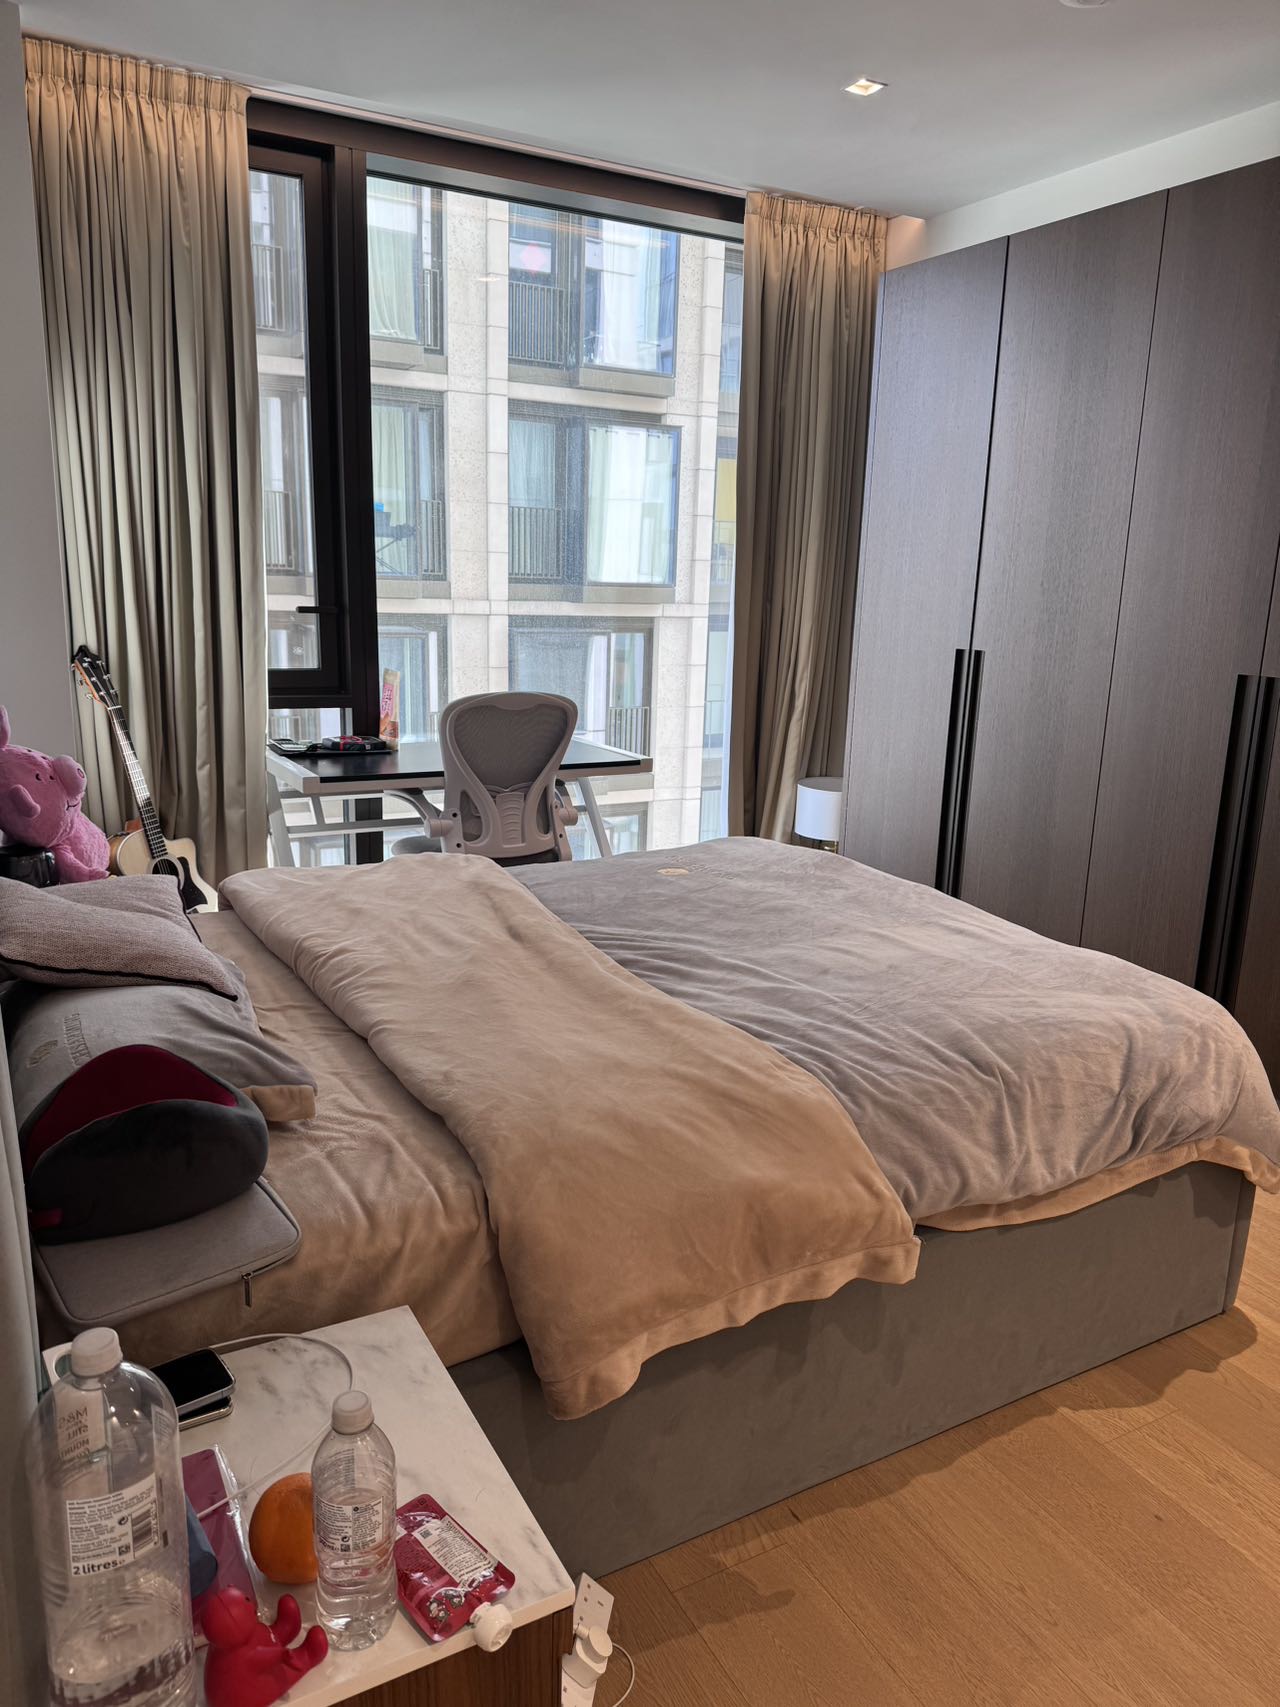 Find 1B1B (1 Bed 1 Bathroom) to rent in London